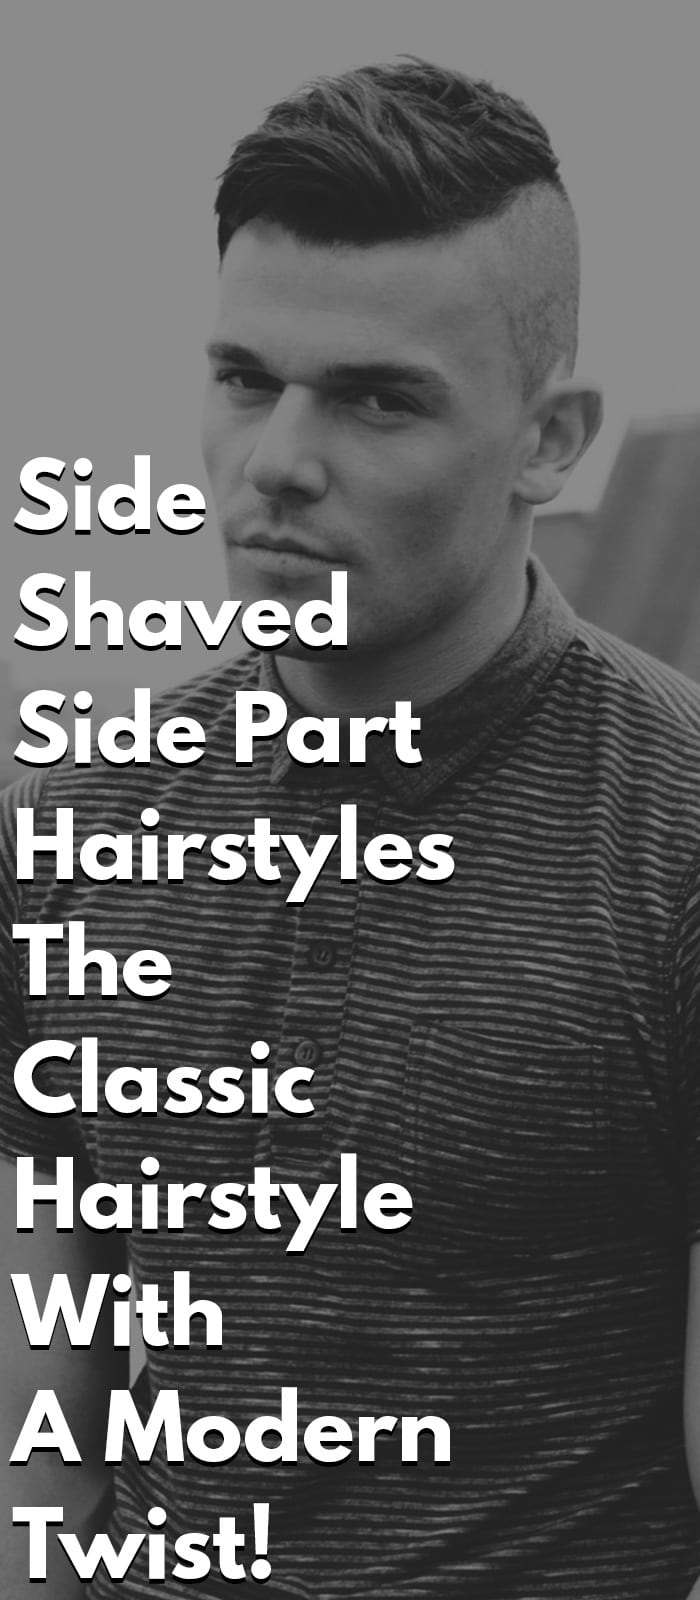 Side Shaved Side Part Hairstyles - The Classic Hairstyle